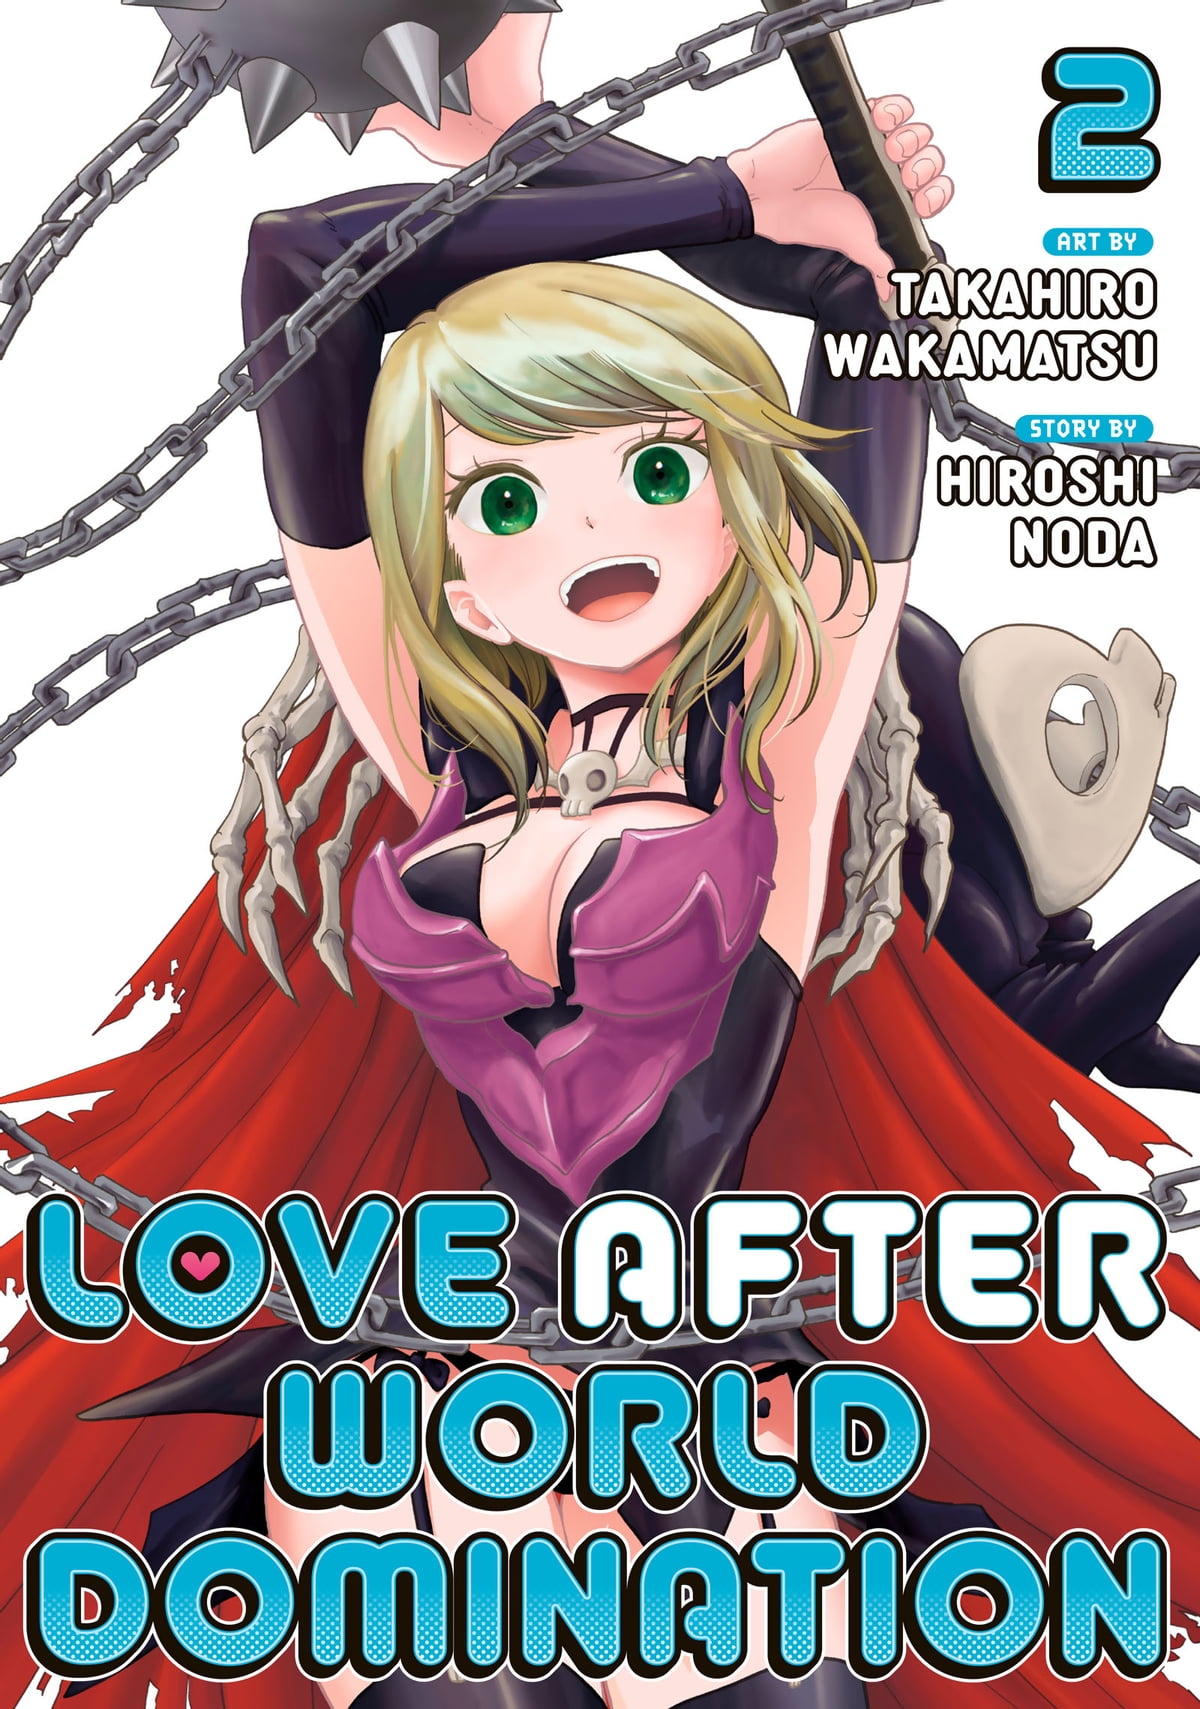 Love After World Domination Volume 2 Manga Review - TheOASG